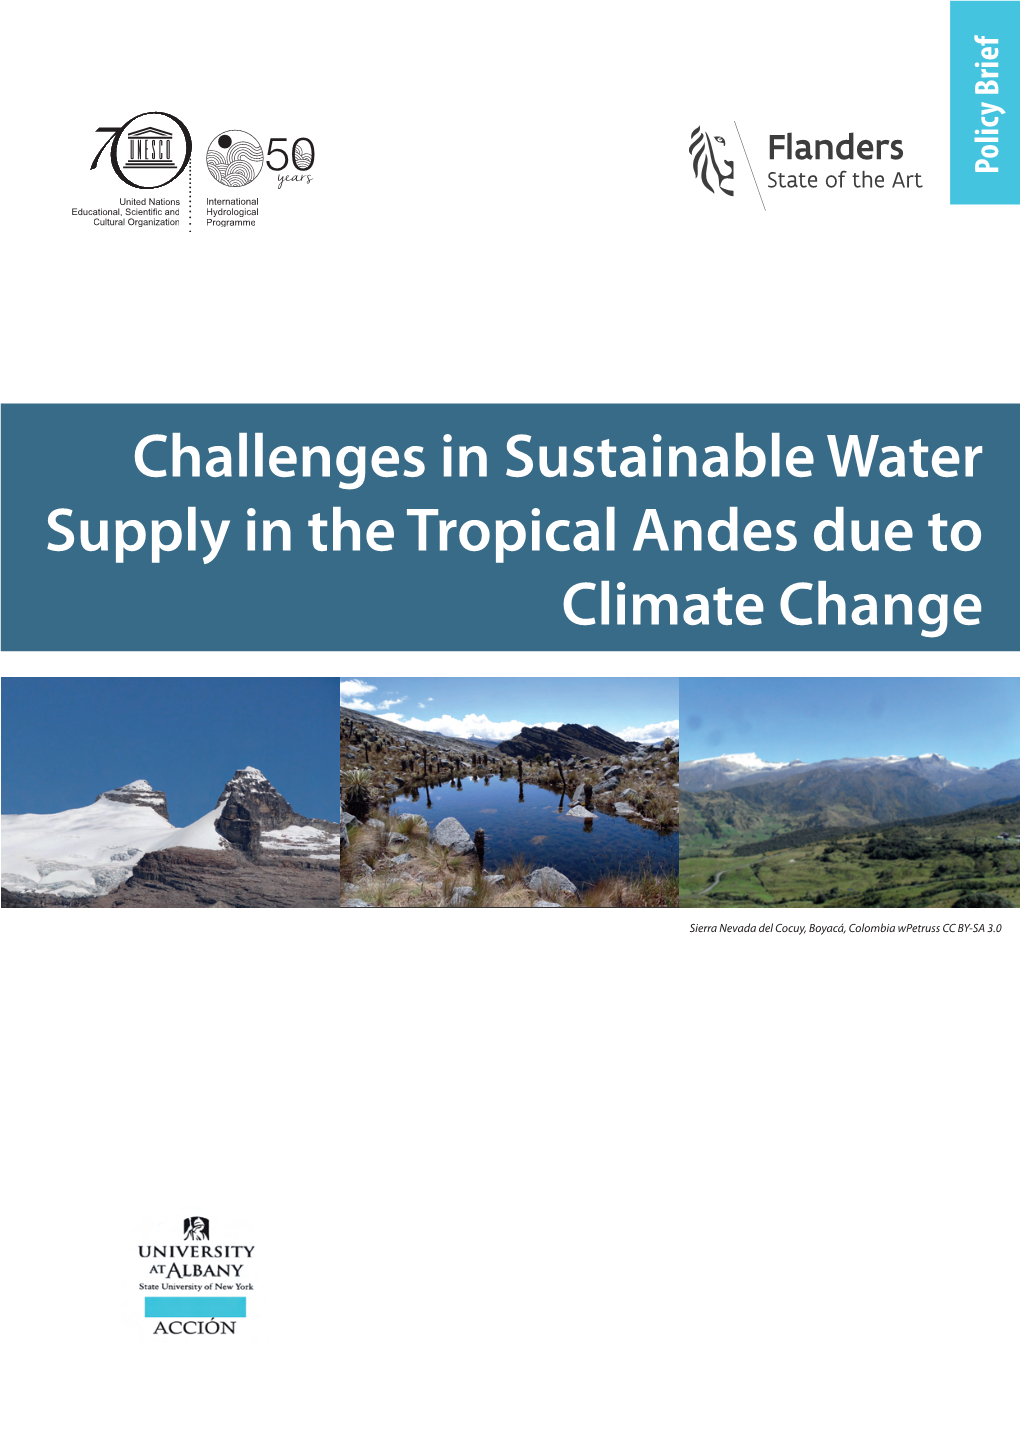 Challenges in Sustainable Water Supply in the Tropical Andes Due to Climate Change